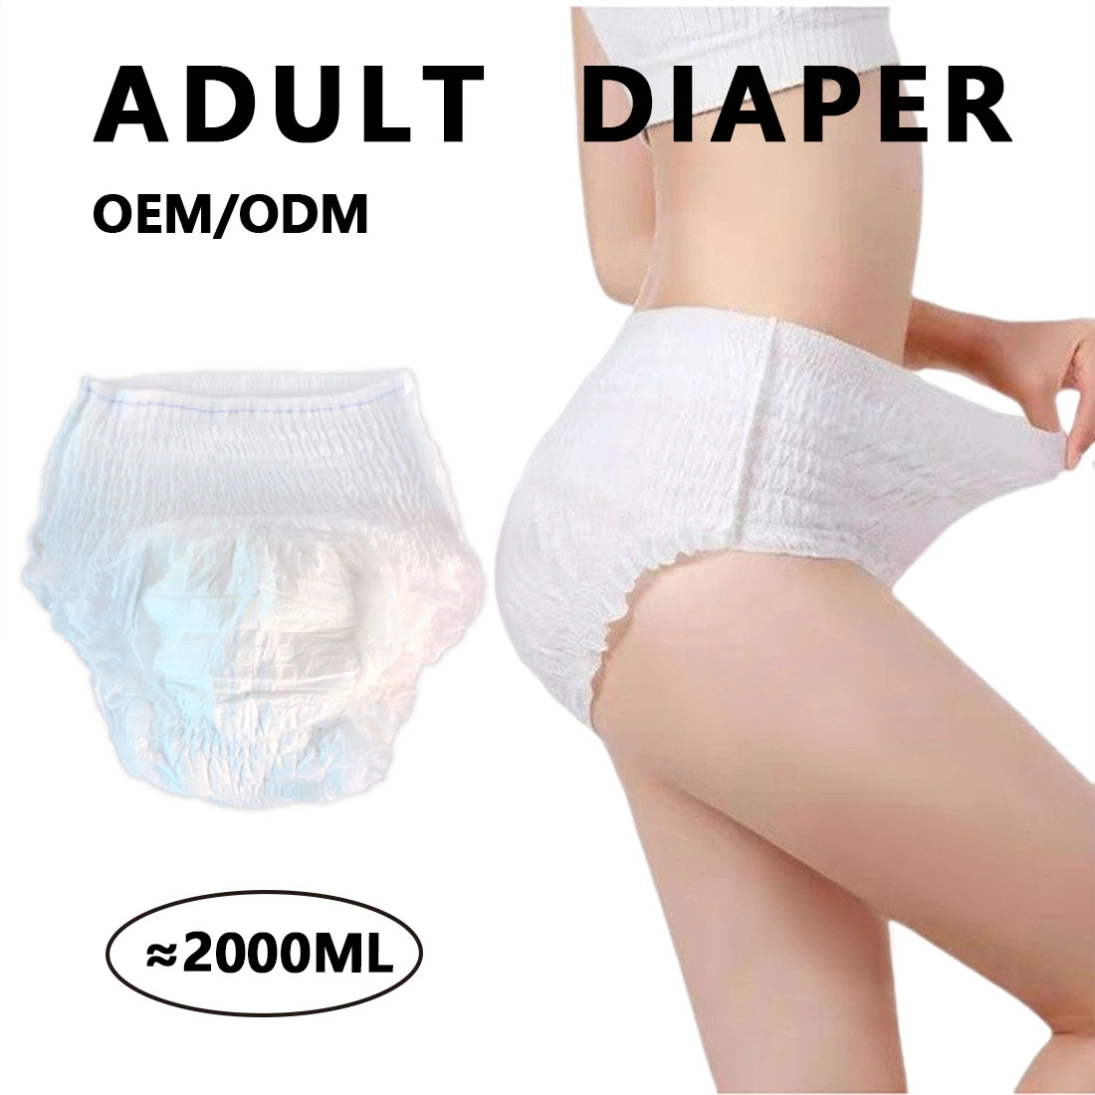 Adult Care Products Disposable Adult Diaper Pull up New Products Looking for Distributor